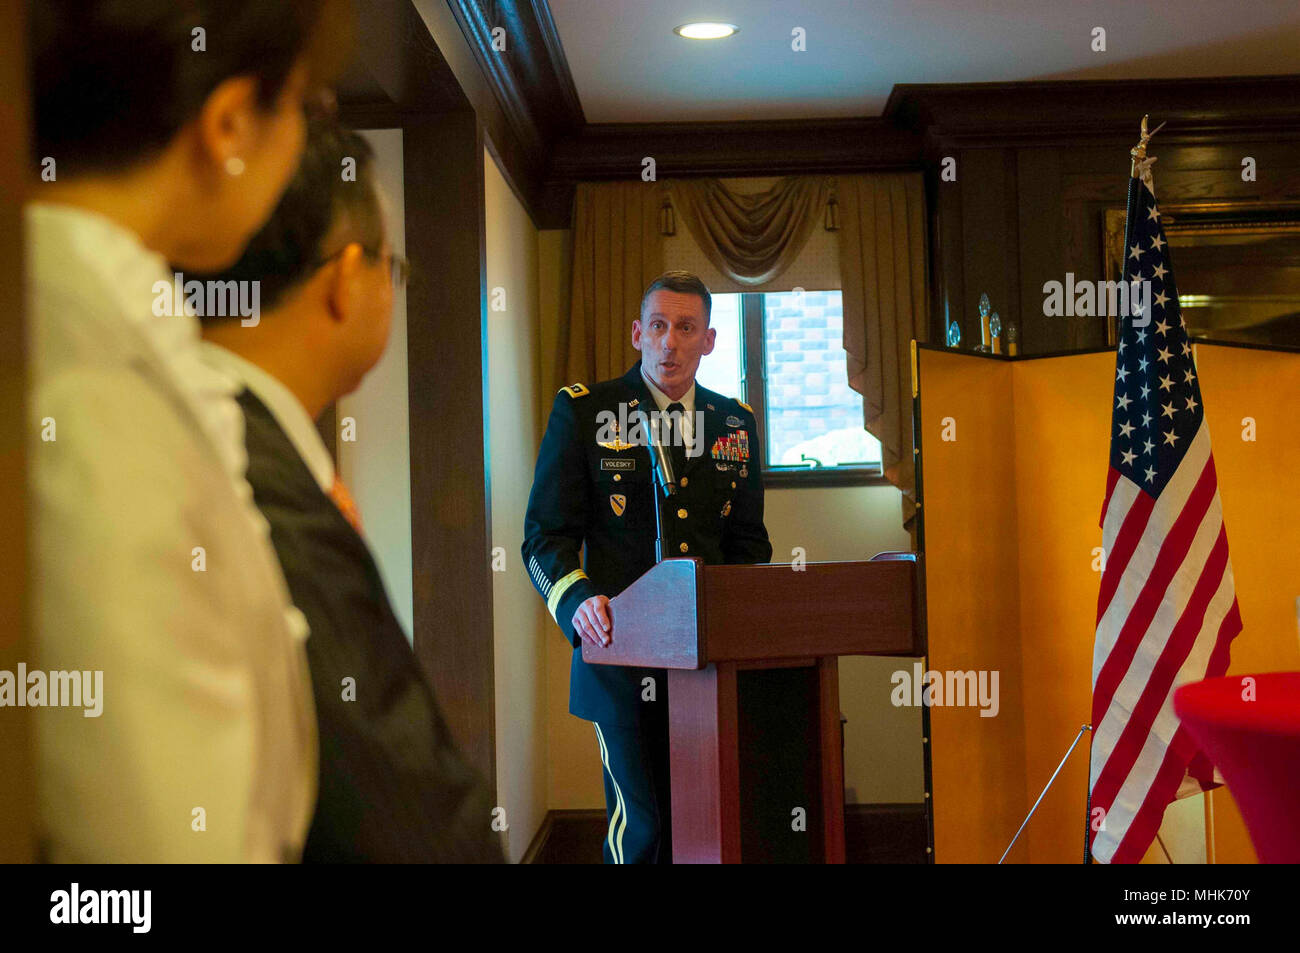 I Corps Commanding General, Lt. Gen. Gary J. Volesky gives opening remarks during a Tomodachi Reception at the official residence of the Consulate-General of Japan in Seattle Mar. 23, 2018.  Several senior leaders and other service members were invited guests to the consul general’s home for the reception to express gratitude and reinforce the continued partnership of the U.S. and Japan forces. (U.S. Army Stock Photo